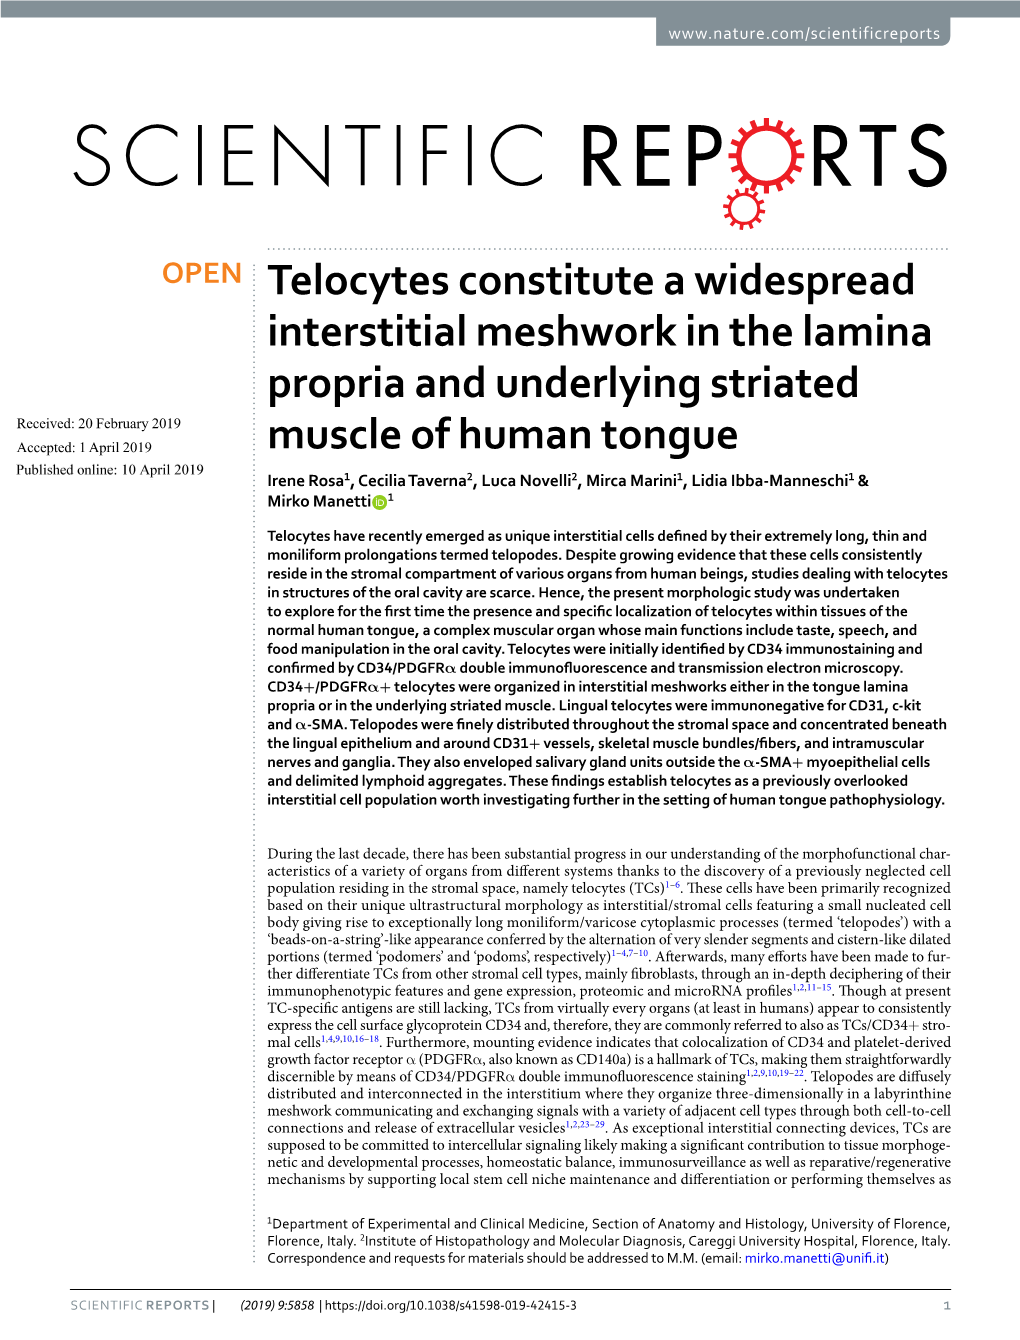 Telocytes Constitute a Widespread Interstitial Meshwork in the Lamina Propria and Underlying Striated Muscle of Human Tongue